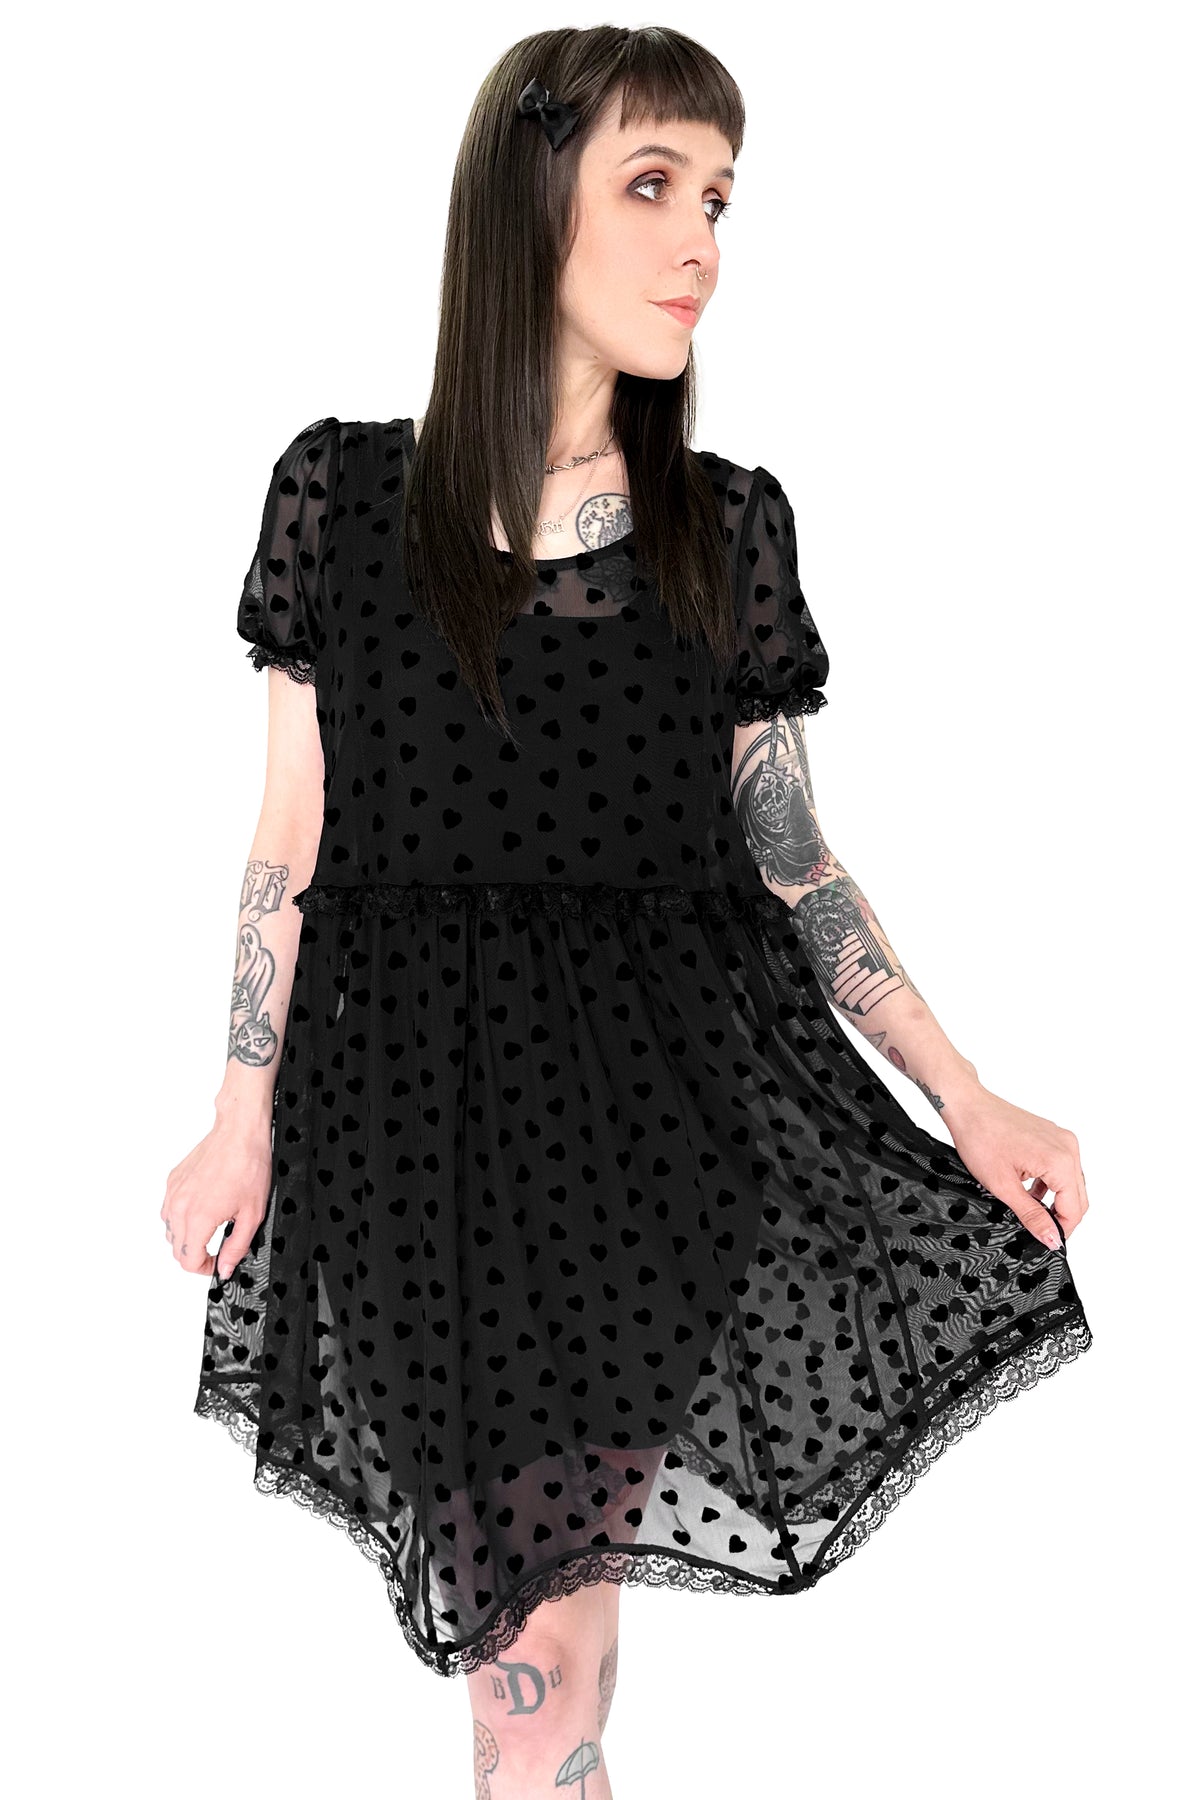 black mesh babydoll dress with flocked black hearts and lace trim